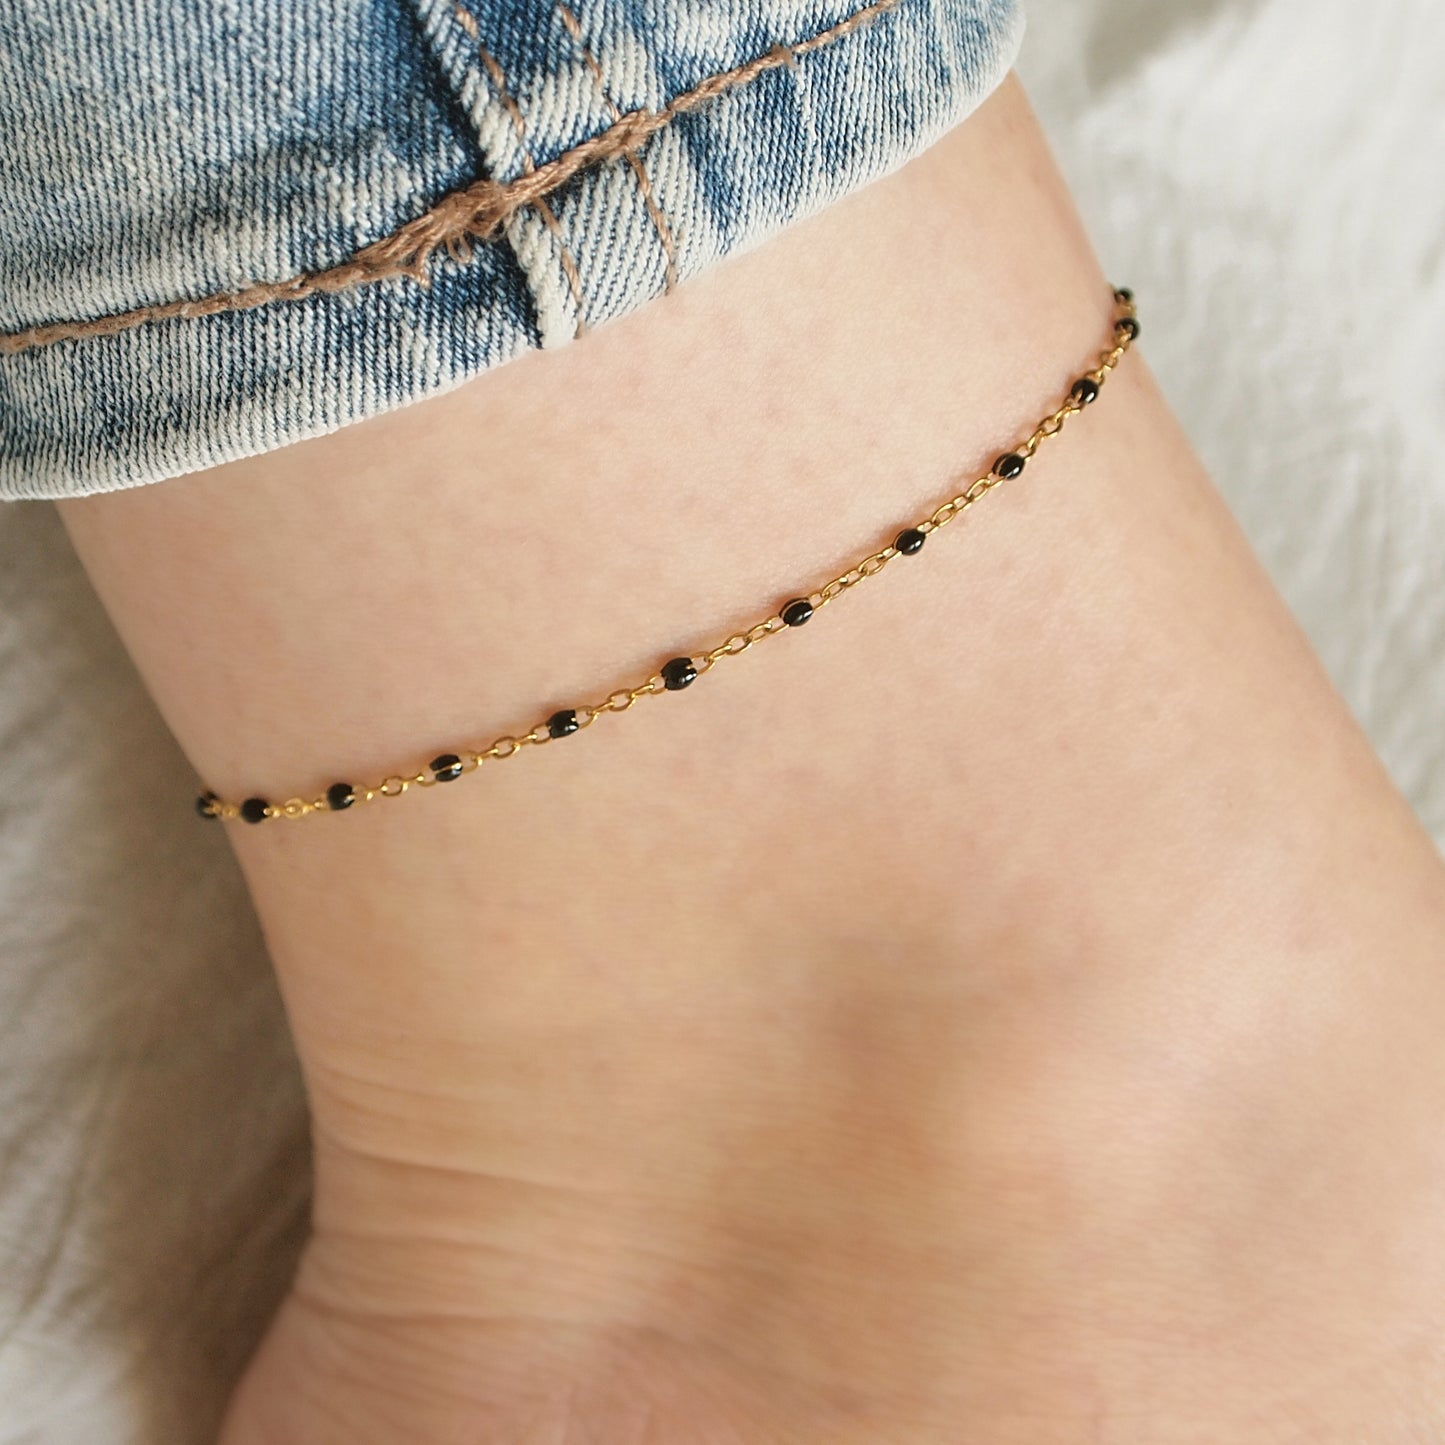 dainty woman ankle bracelet with small black beads